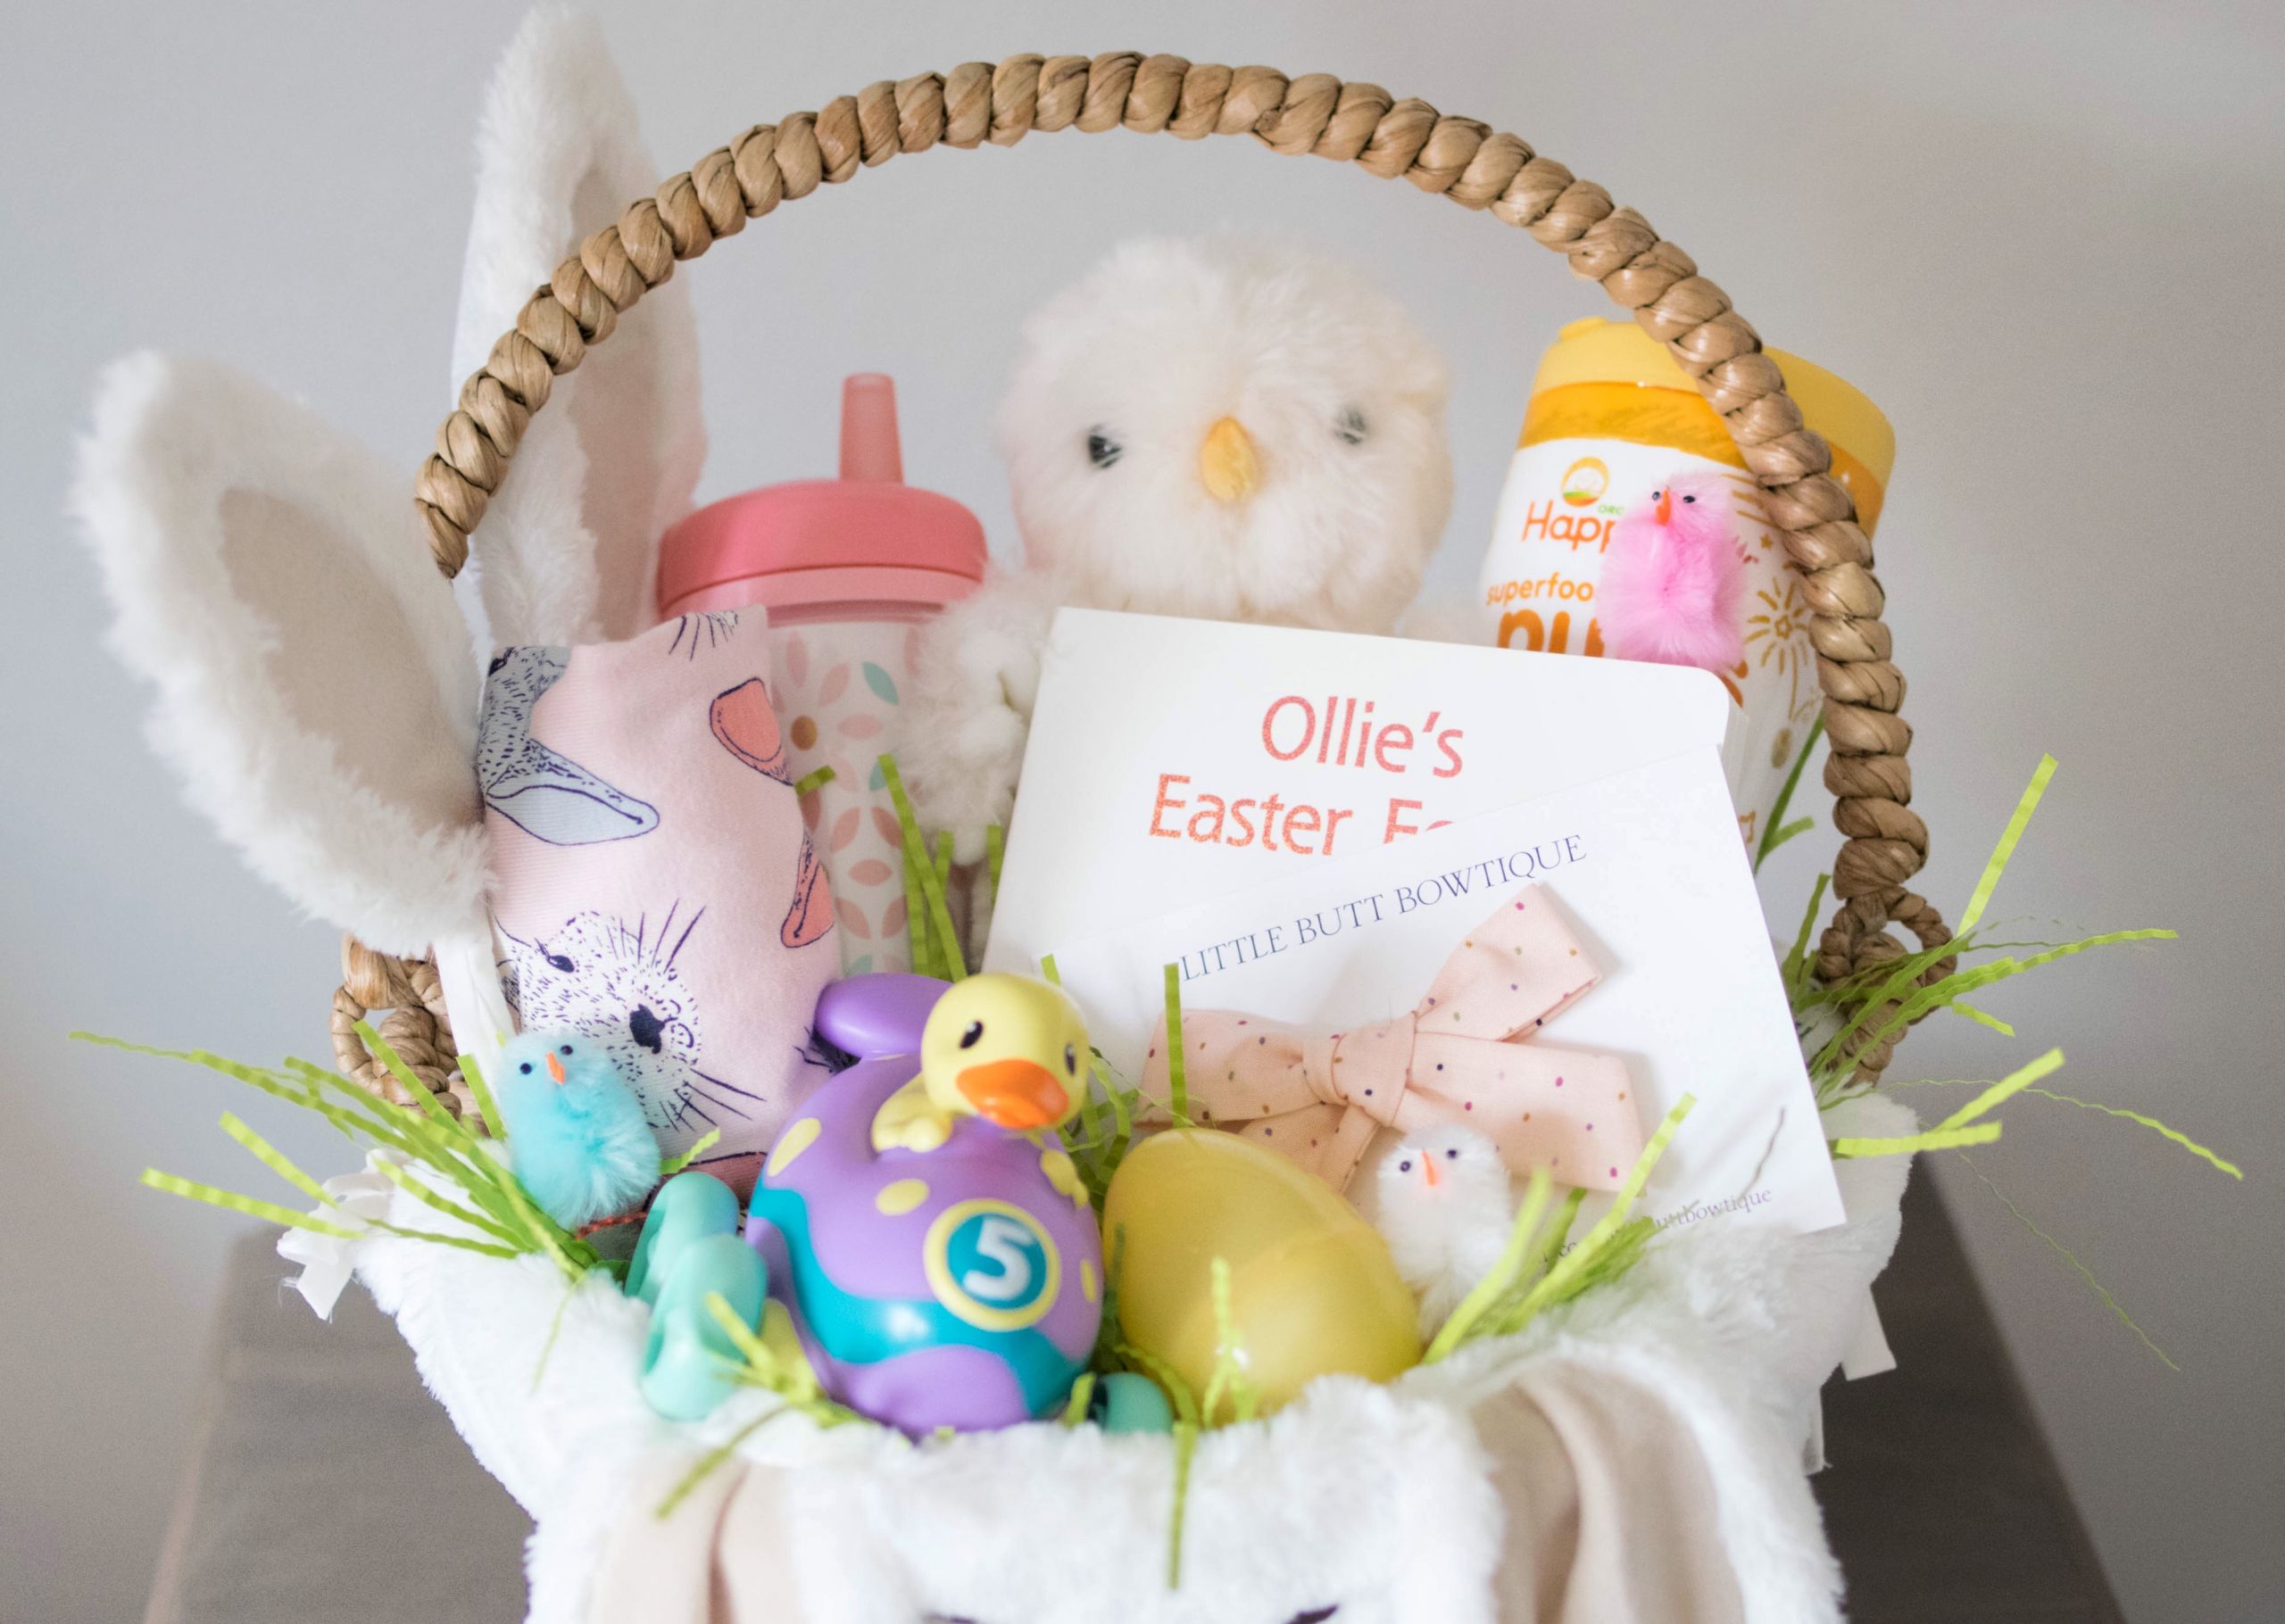 Ideas For Baby Easter Basket
 Easter Basket Ideas For Babies and Toddlers A Little